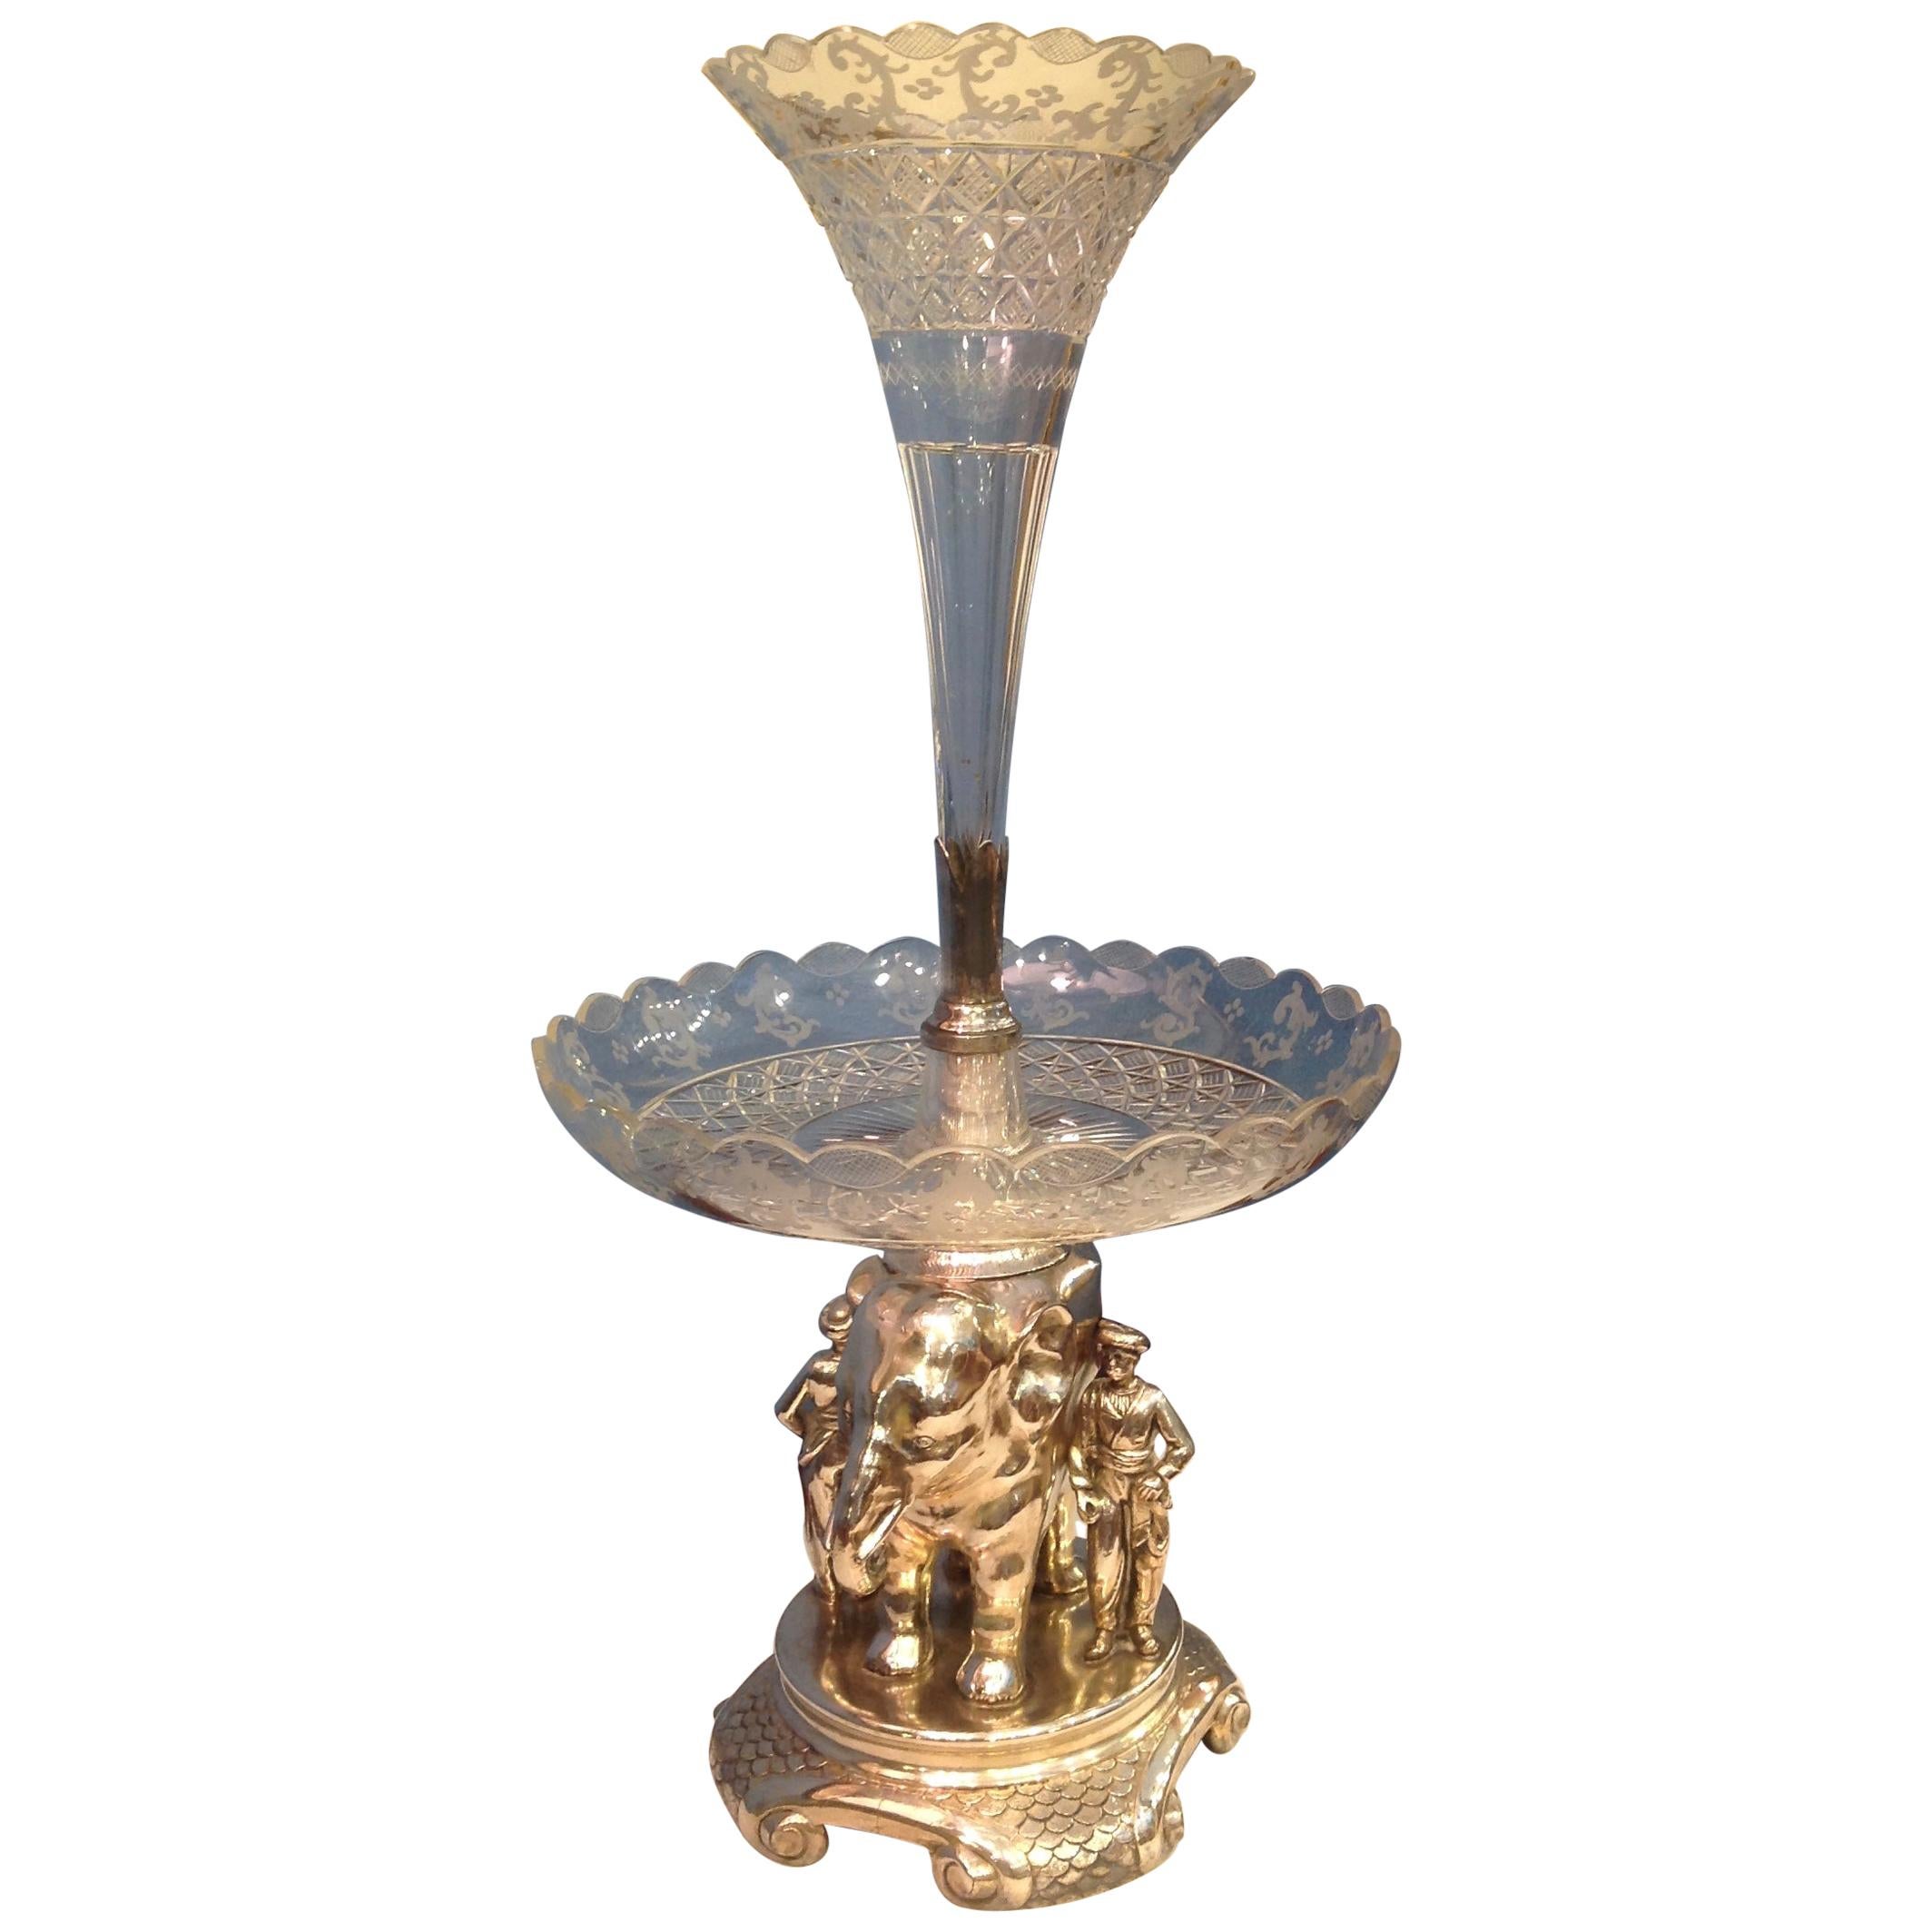 Superb 19th Century Anglo-Indian Style Elephant Motif Centerpiece / Epergne